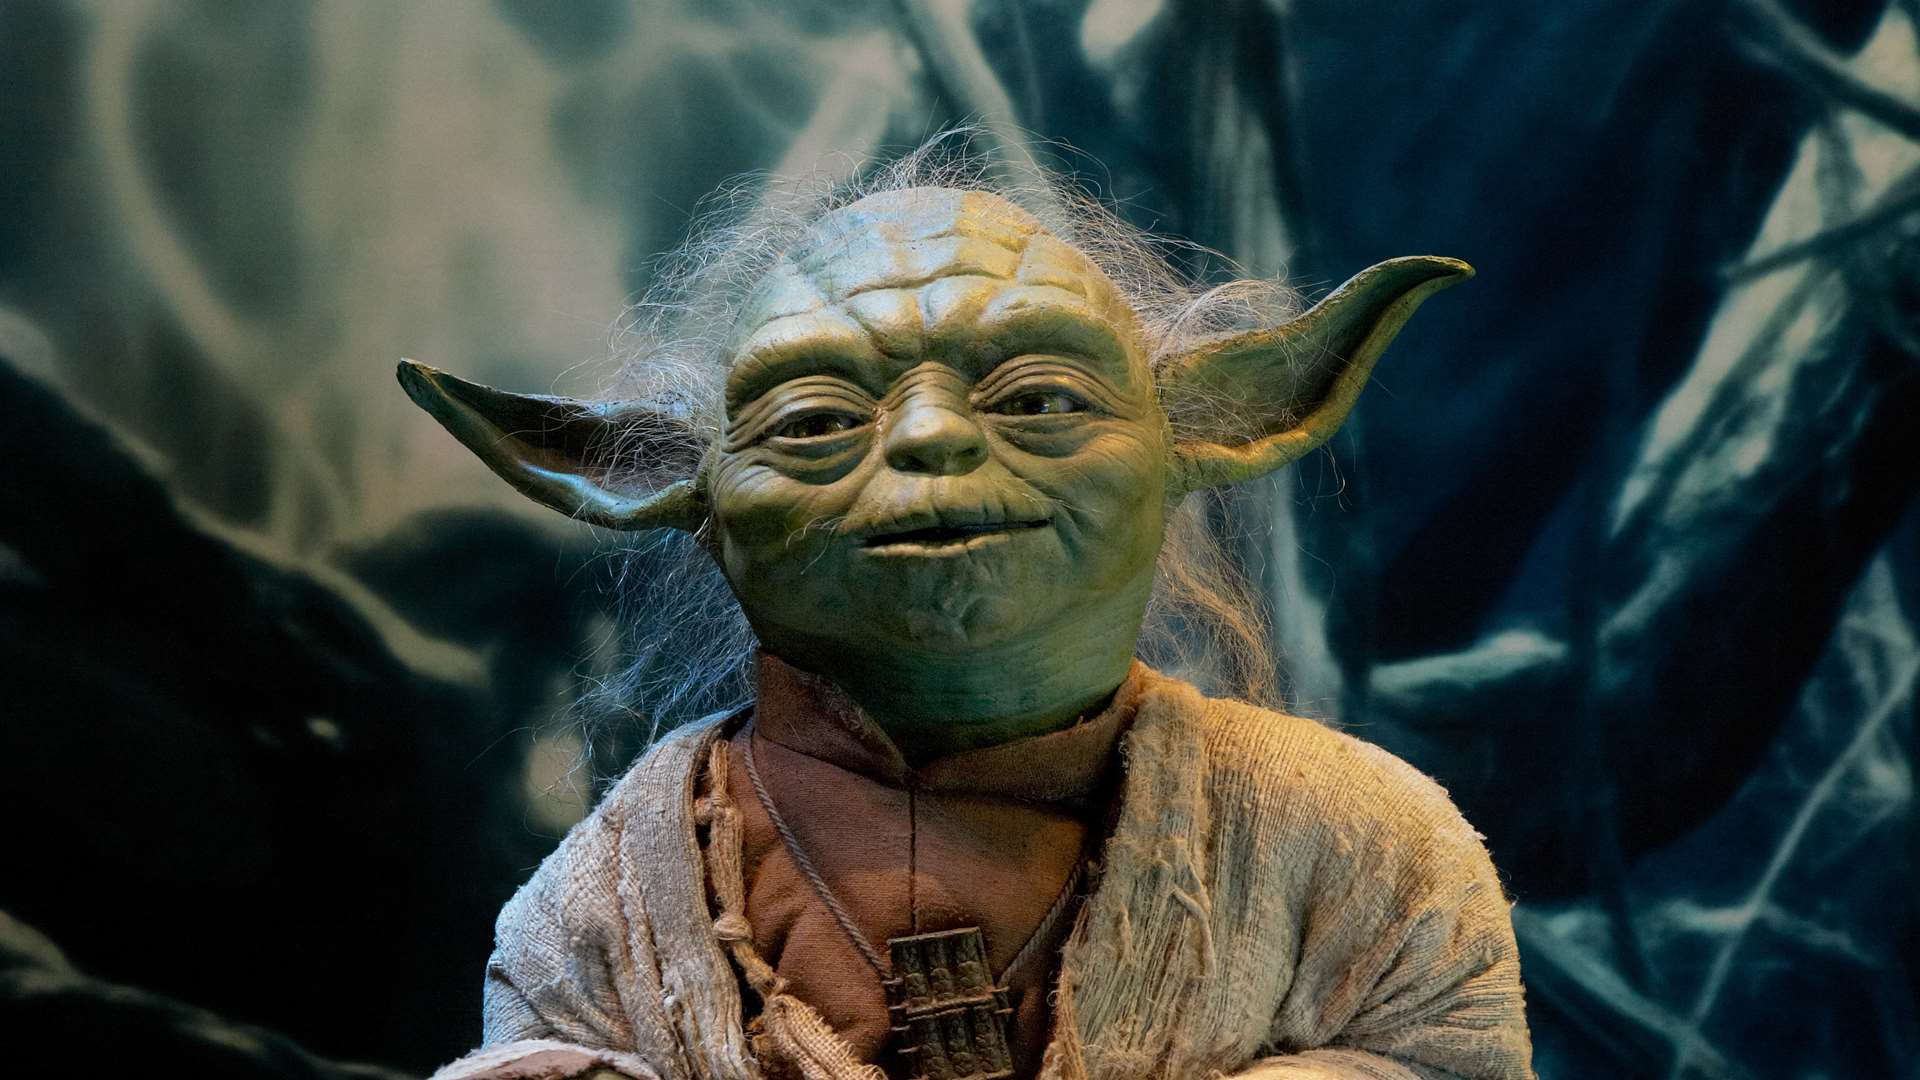 Yoda at the Star Wars Identities exhibition at the O2. Picture: © & TM 2017 Lucasfilm Ltd. All Rights Reserved. Used Under Authorization